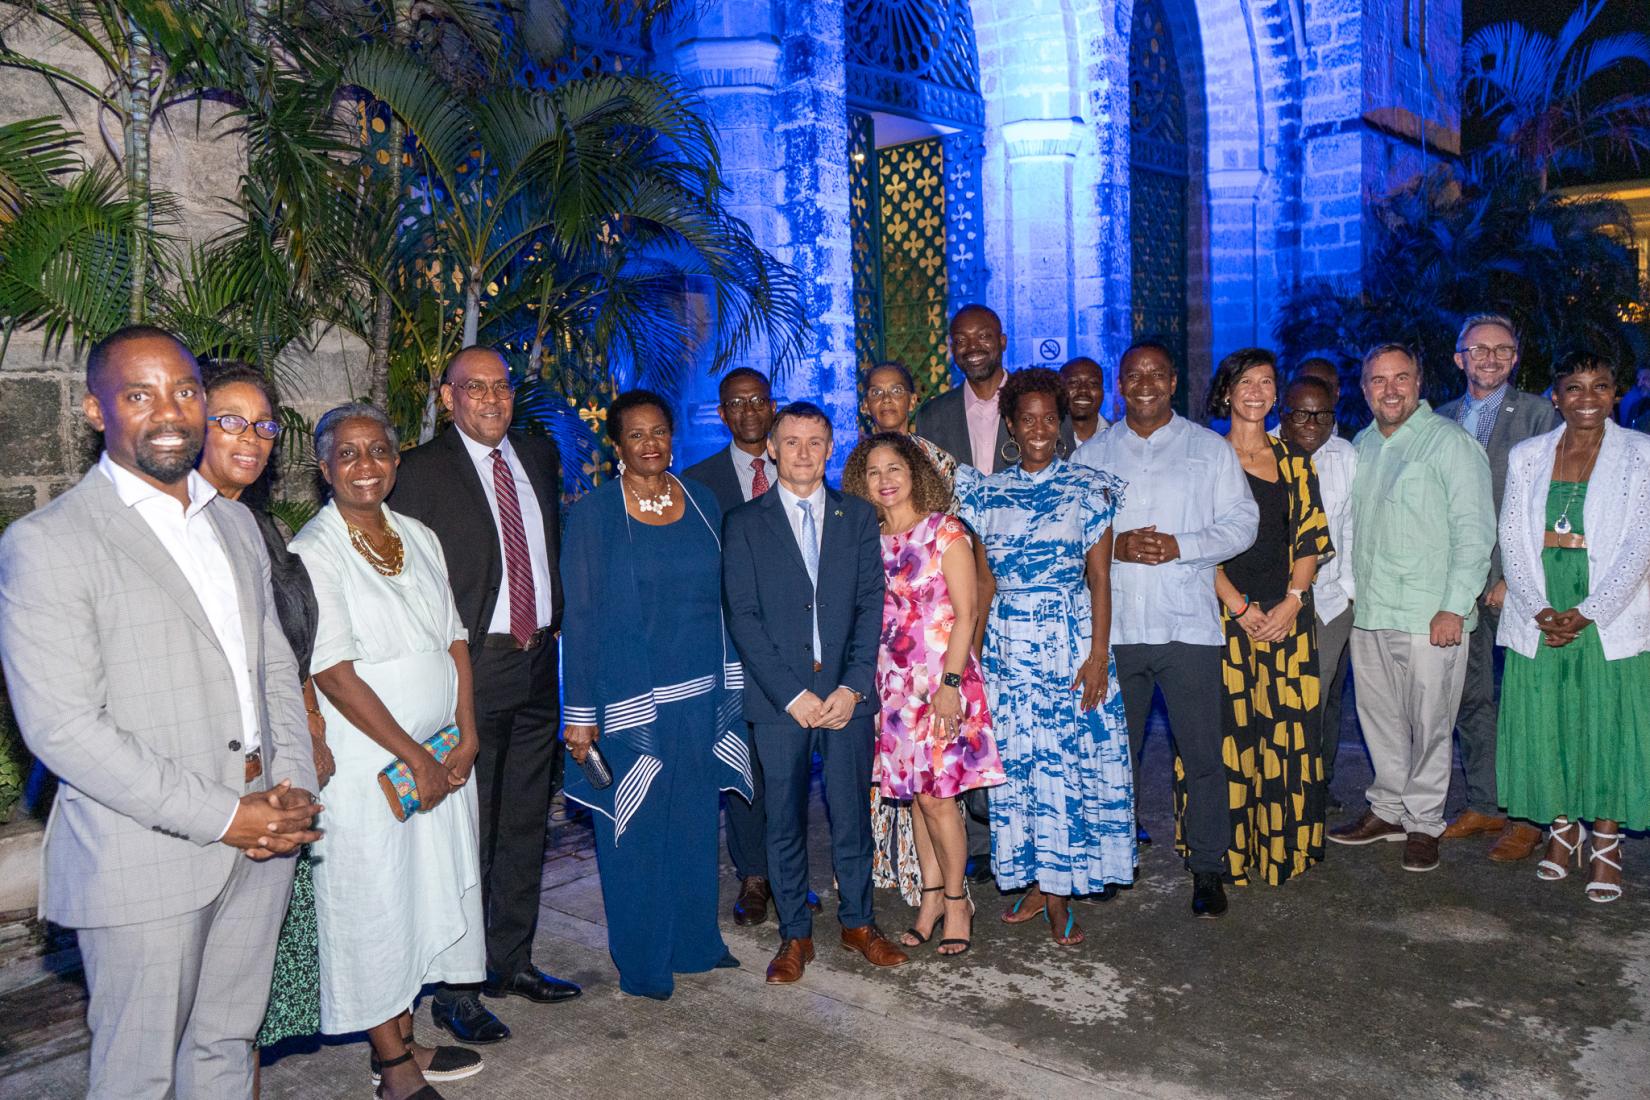 UN Resident Coordinator , Didier Trebucq (centre) is flanked by President of Barbados, Her Excellency Dame Sandra Mason  (left)  and PAHO/WHO Representative for Barbados and the Eastern Caribbean, Dr. Amalia Del Riego (right) , along with Minister of Foreign Affairs the Honorable Kerrie Symmonds (4th from left)  and other Government and UN officials , shortly after flicking the switch to illuminate the Parliament building.